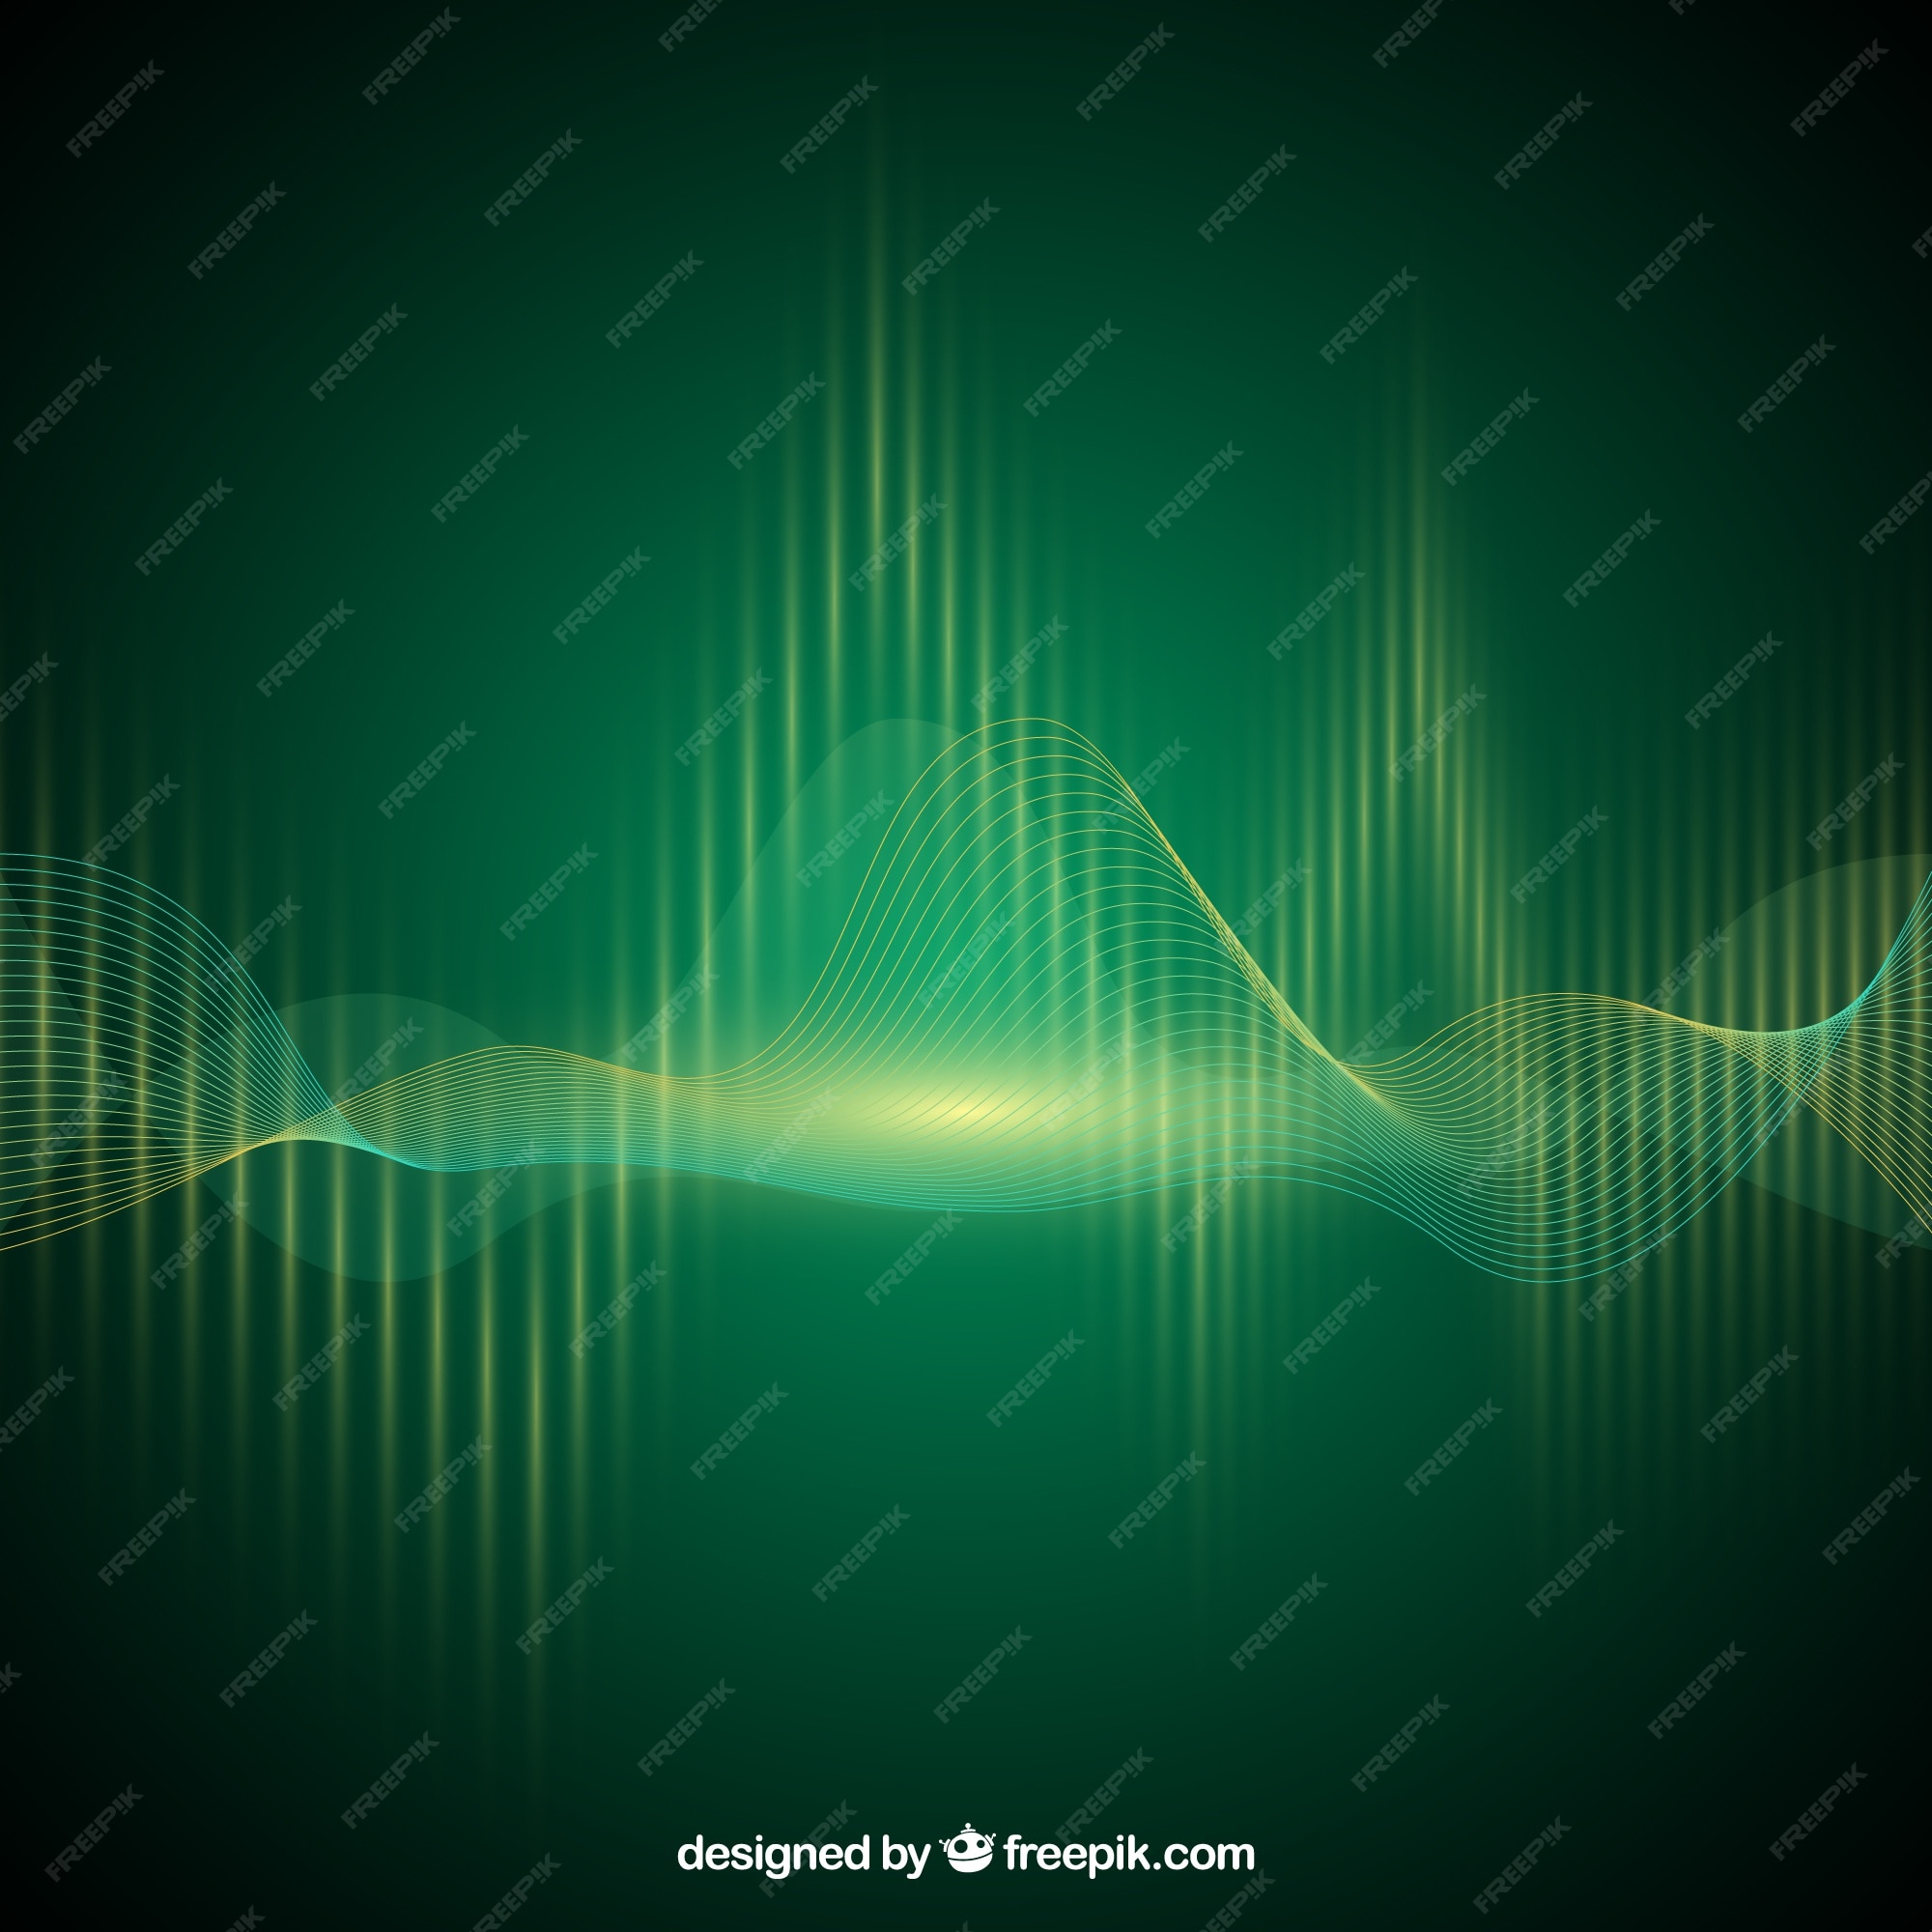 Free Vector | Green background with sound wave